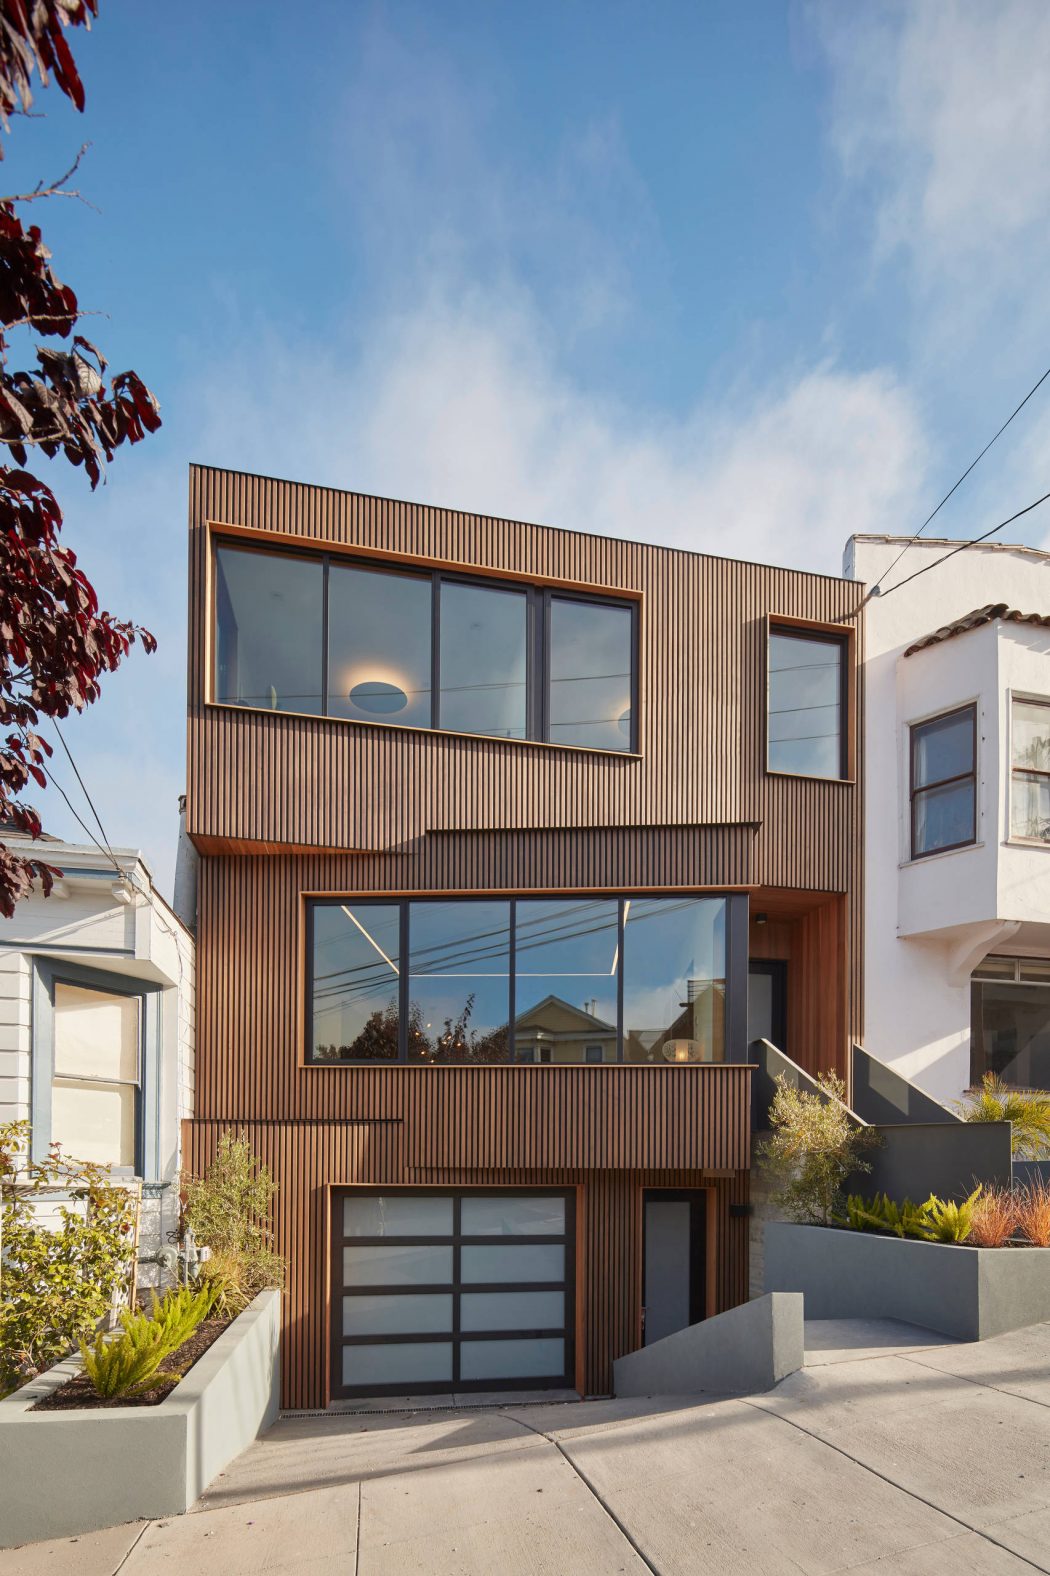 Modern multistory building with wood-paneled exterior, expansive windows, and minimalist landscaping.